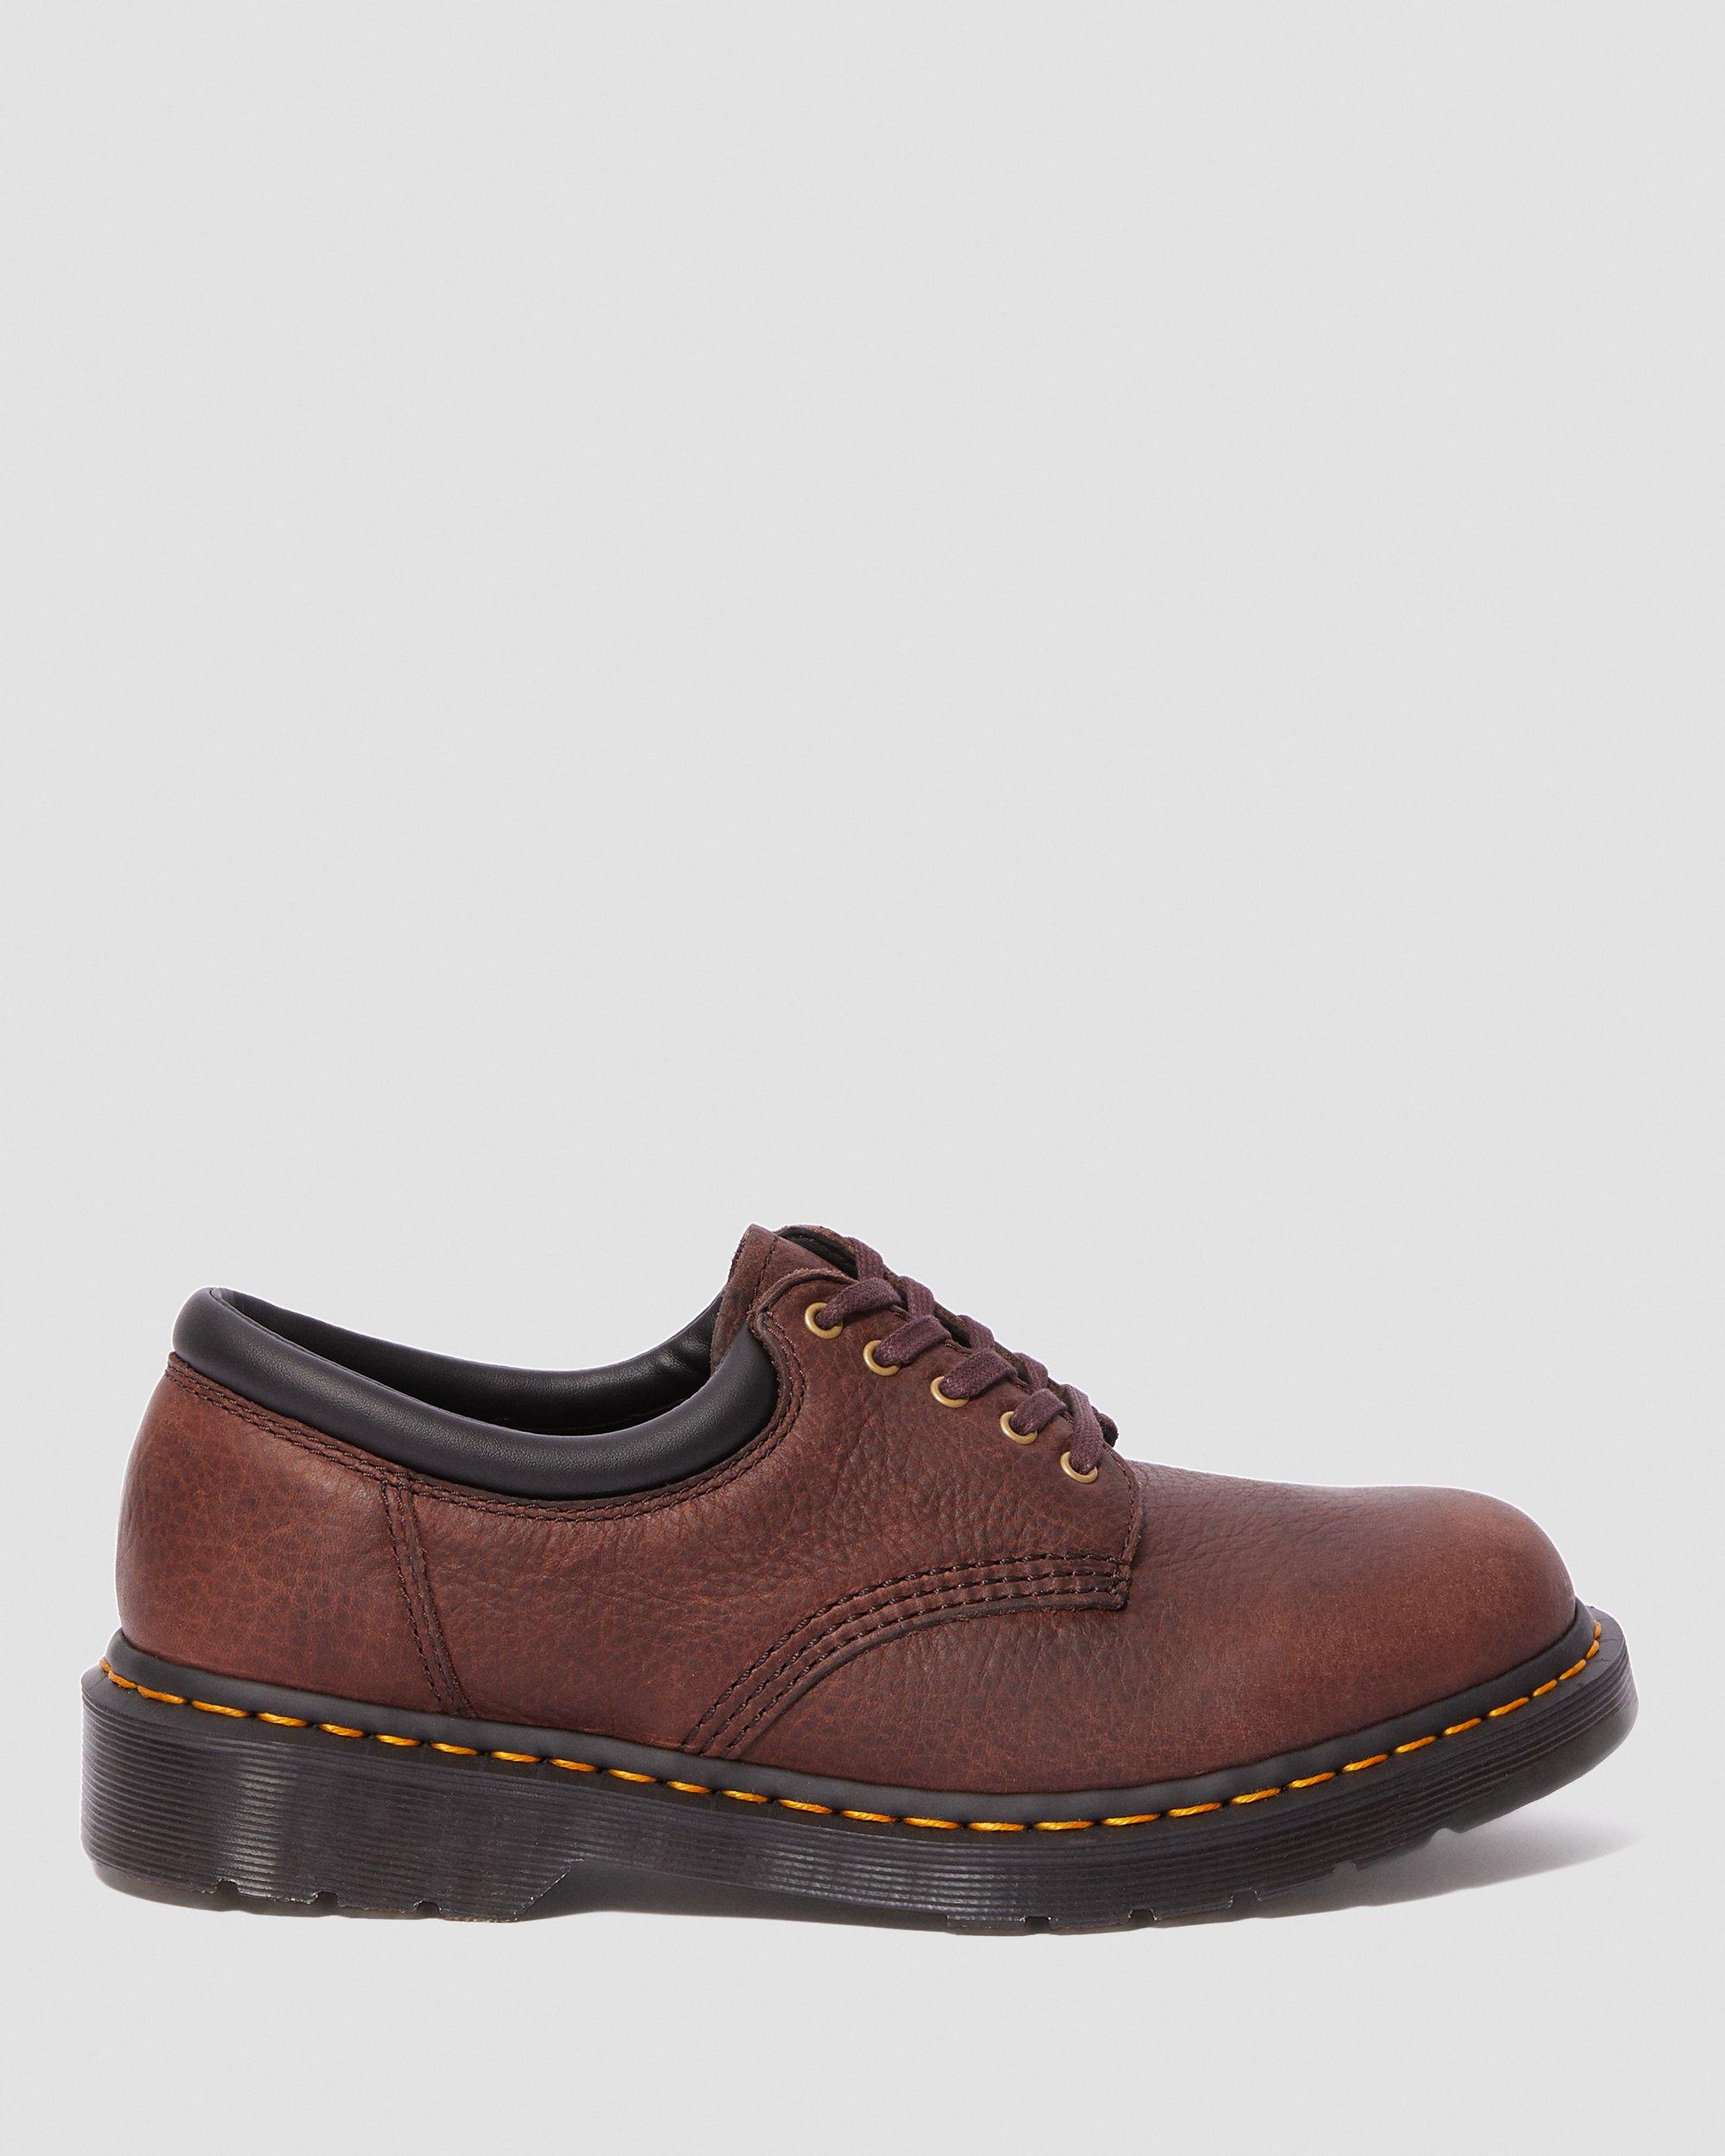 8053 LEATHER PADDED COLLAR SHOES | Dr. Martens